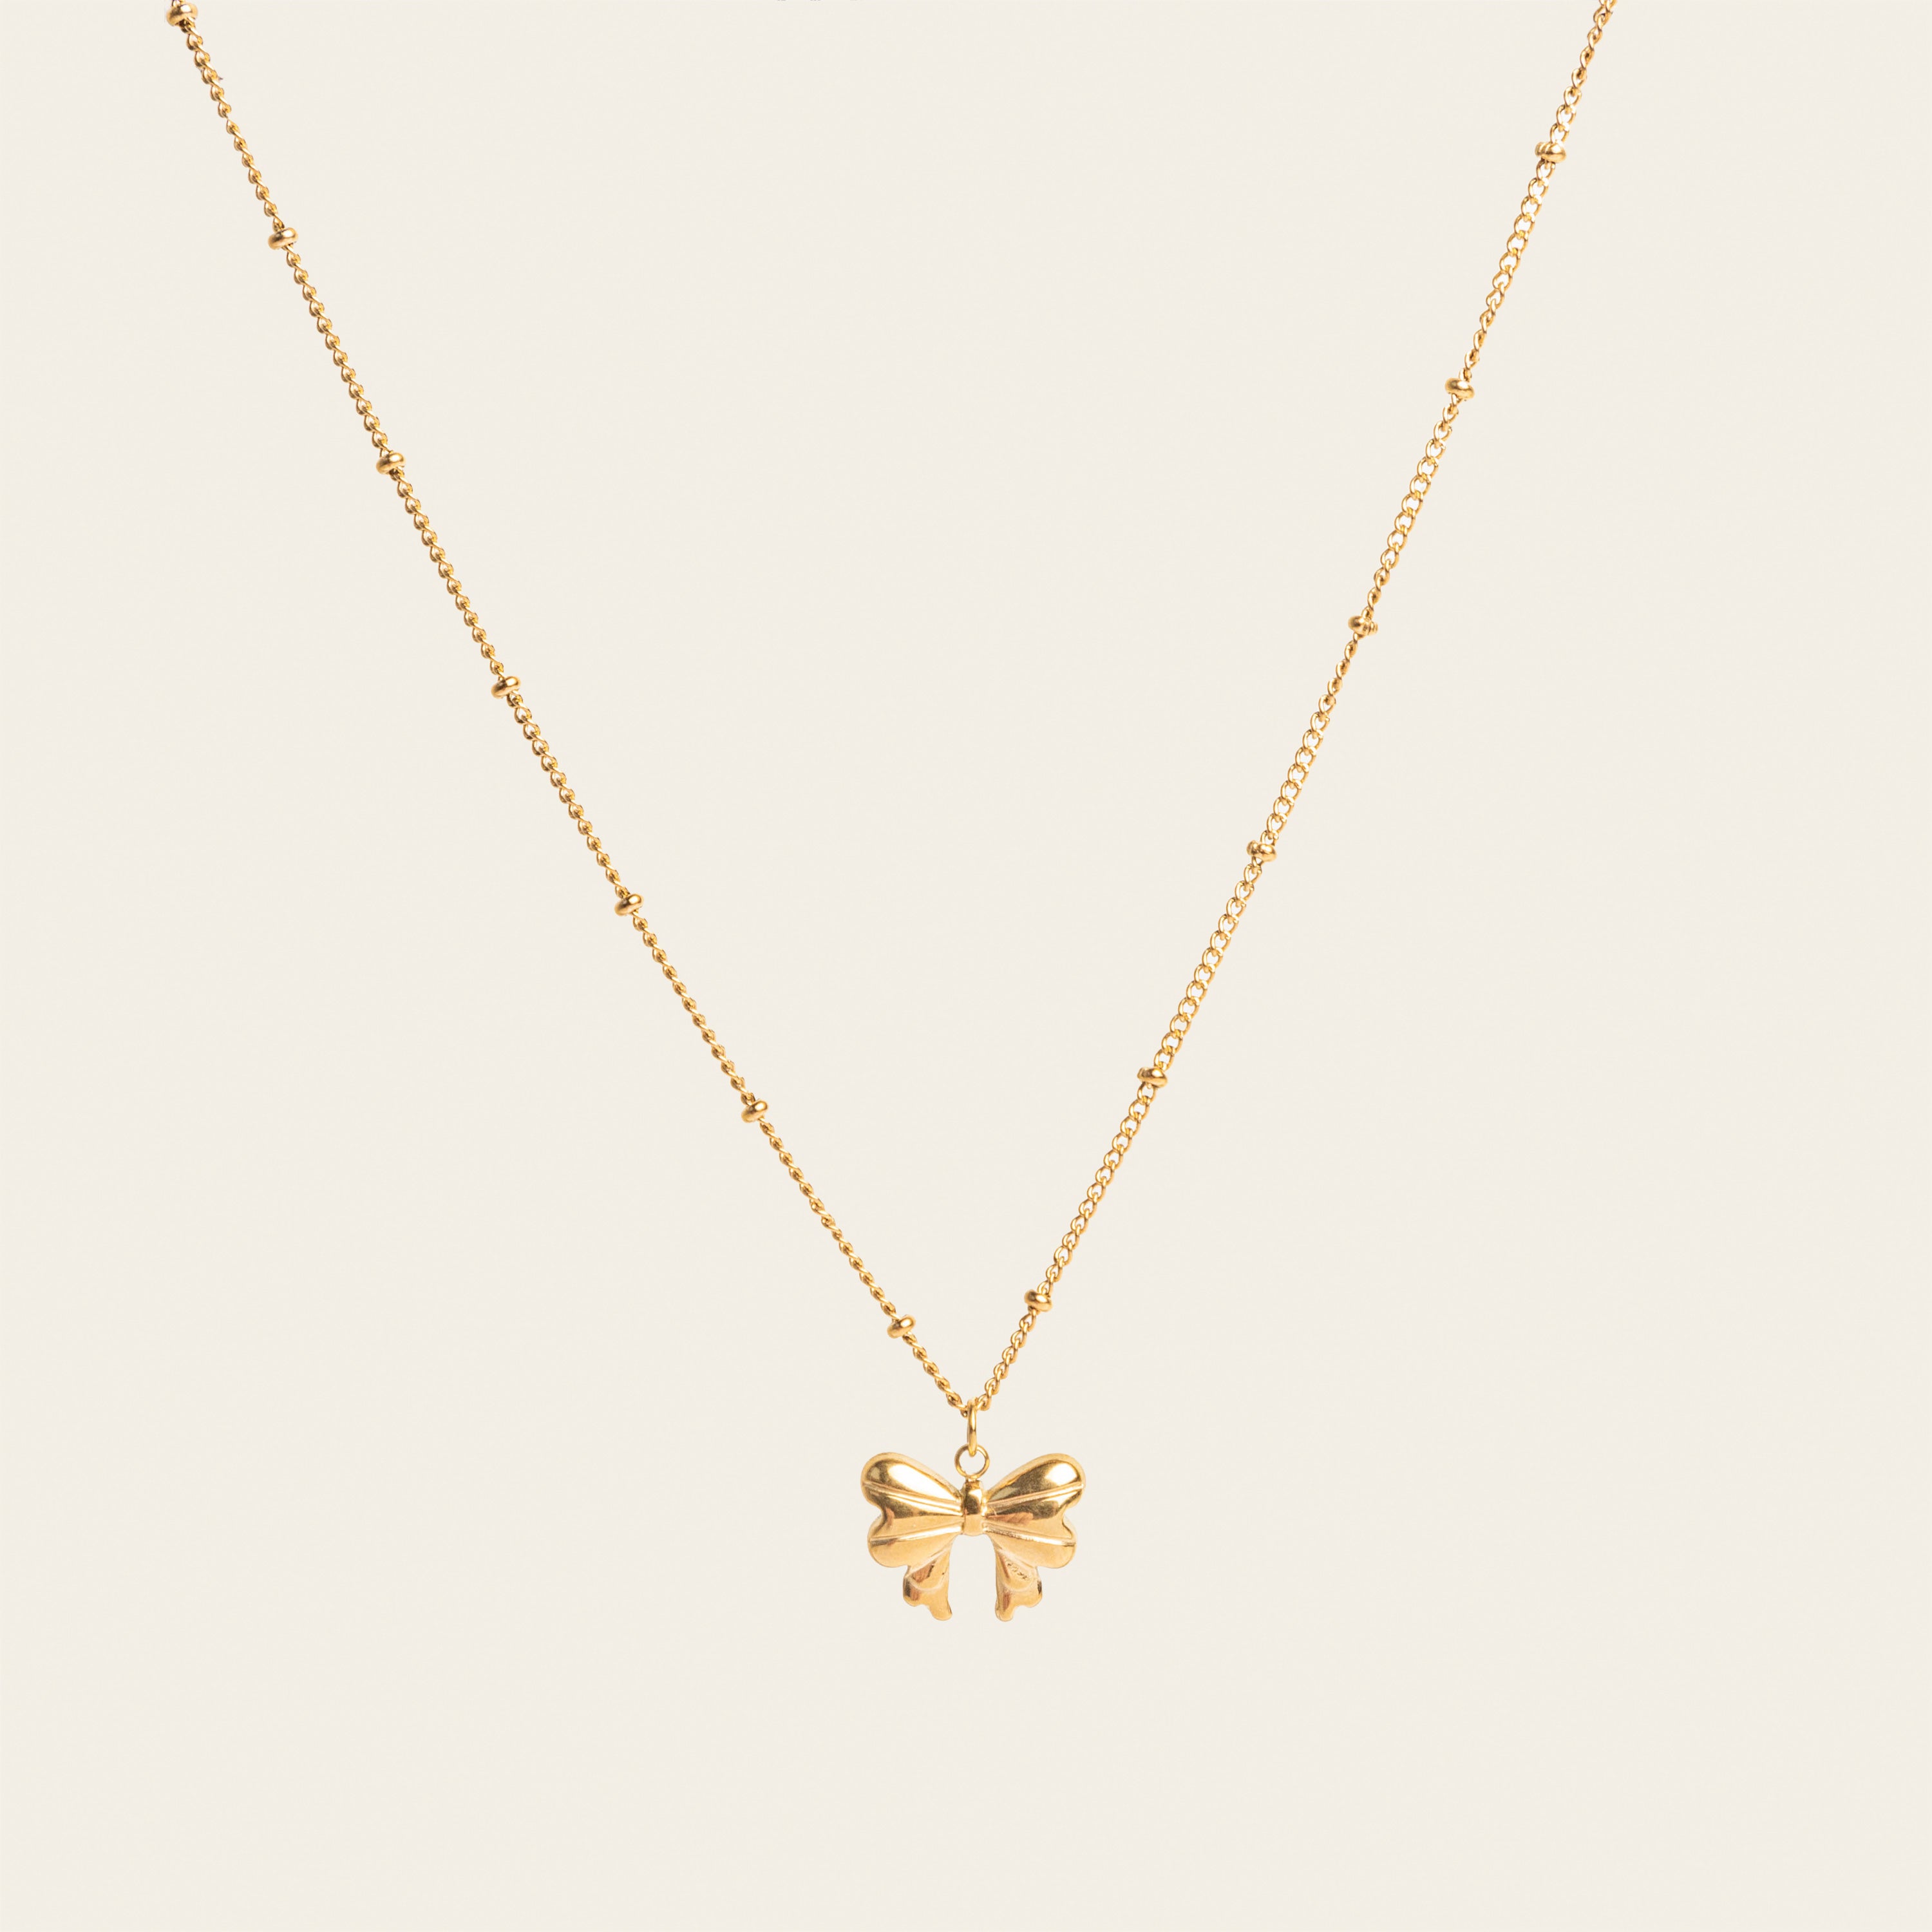 Image of the Wendy Necklace - the perfect combination of style and durability. This versatile accessory, made from non-tarnish 18K gold-plated stainless steel, is water-resistant and suitable for any occasion. With its adjustable design, it's the only necklace you'll ever need. 